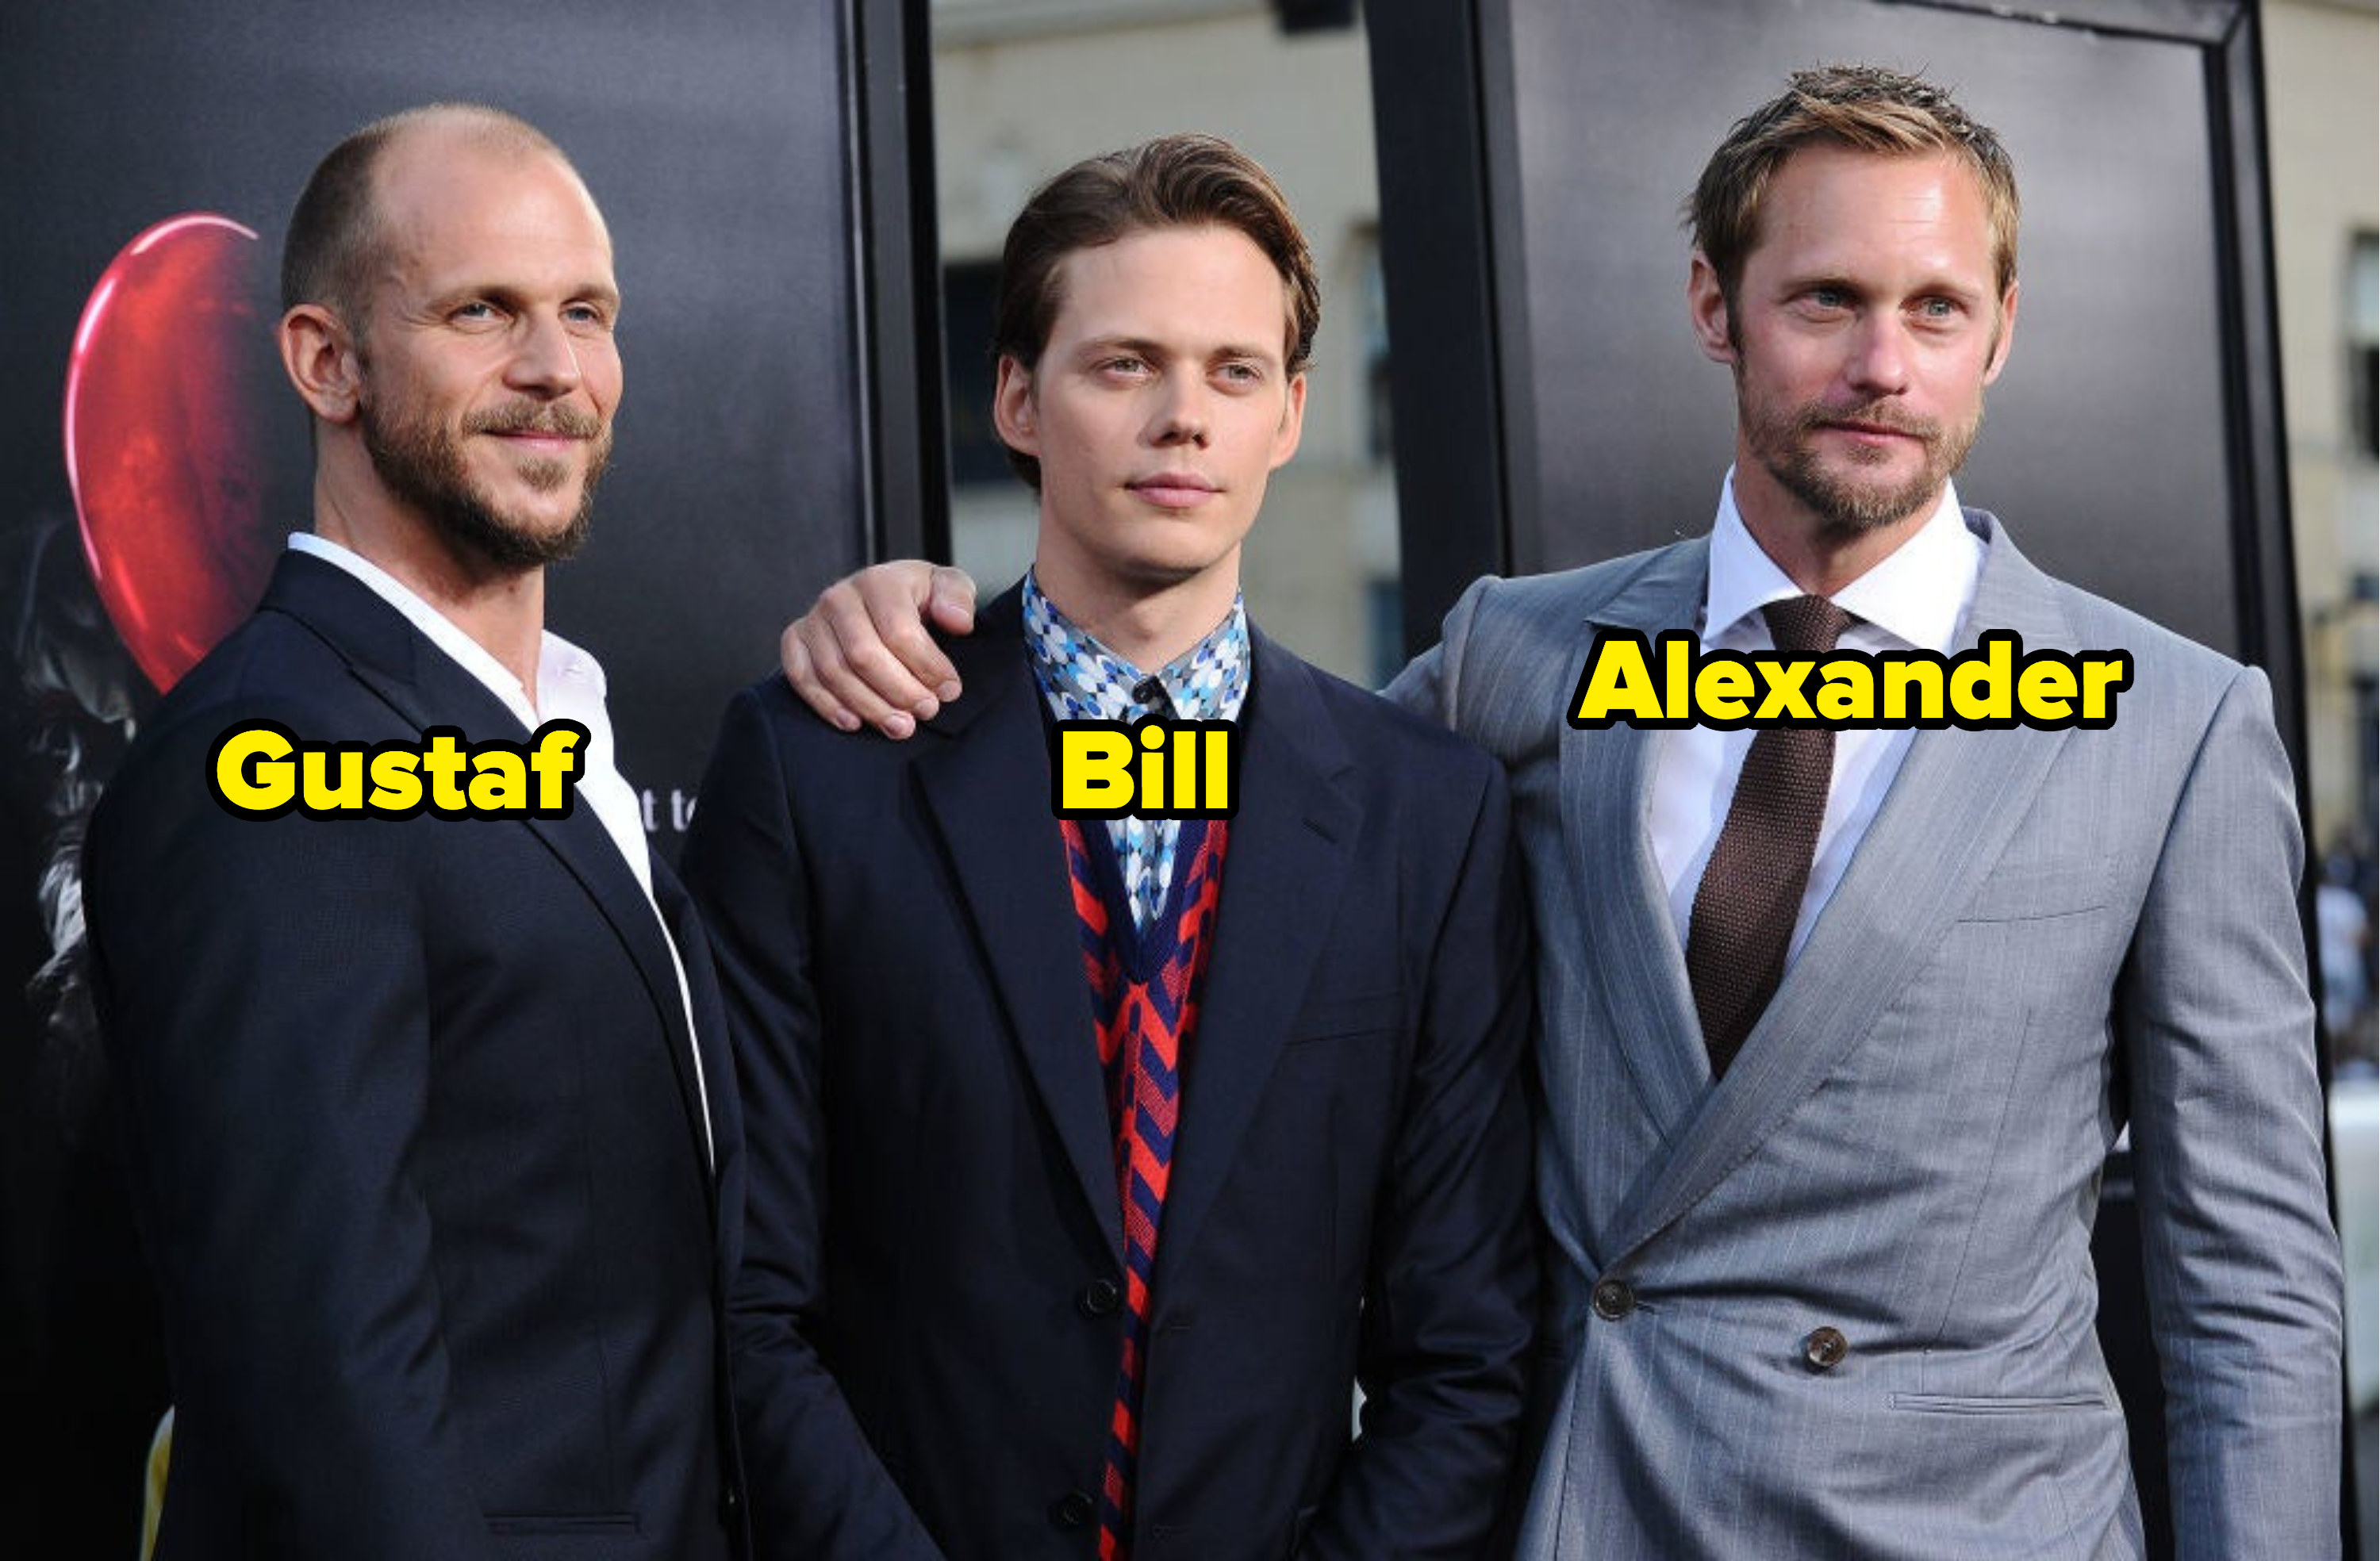 gustaf, bill, and alexander on at an event